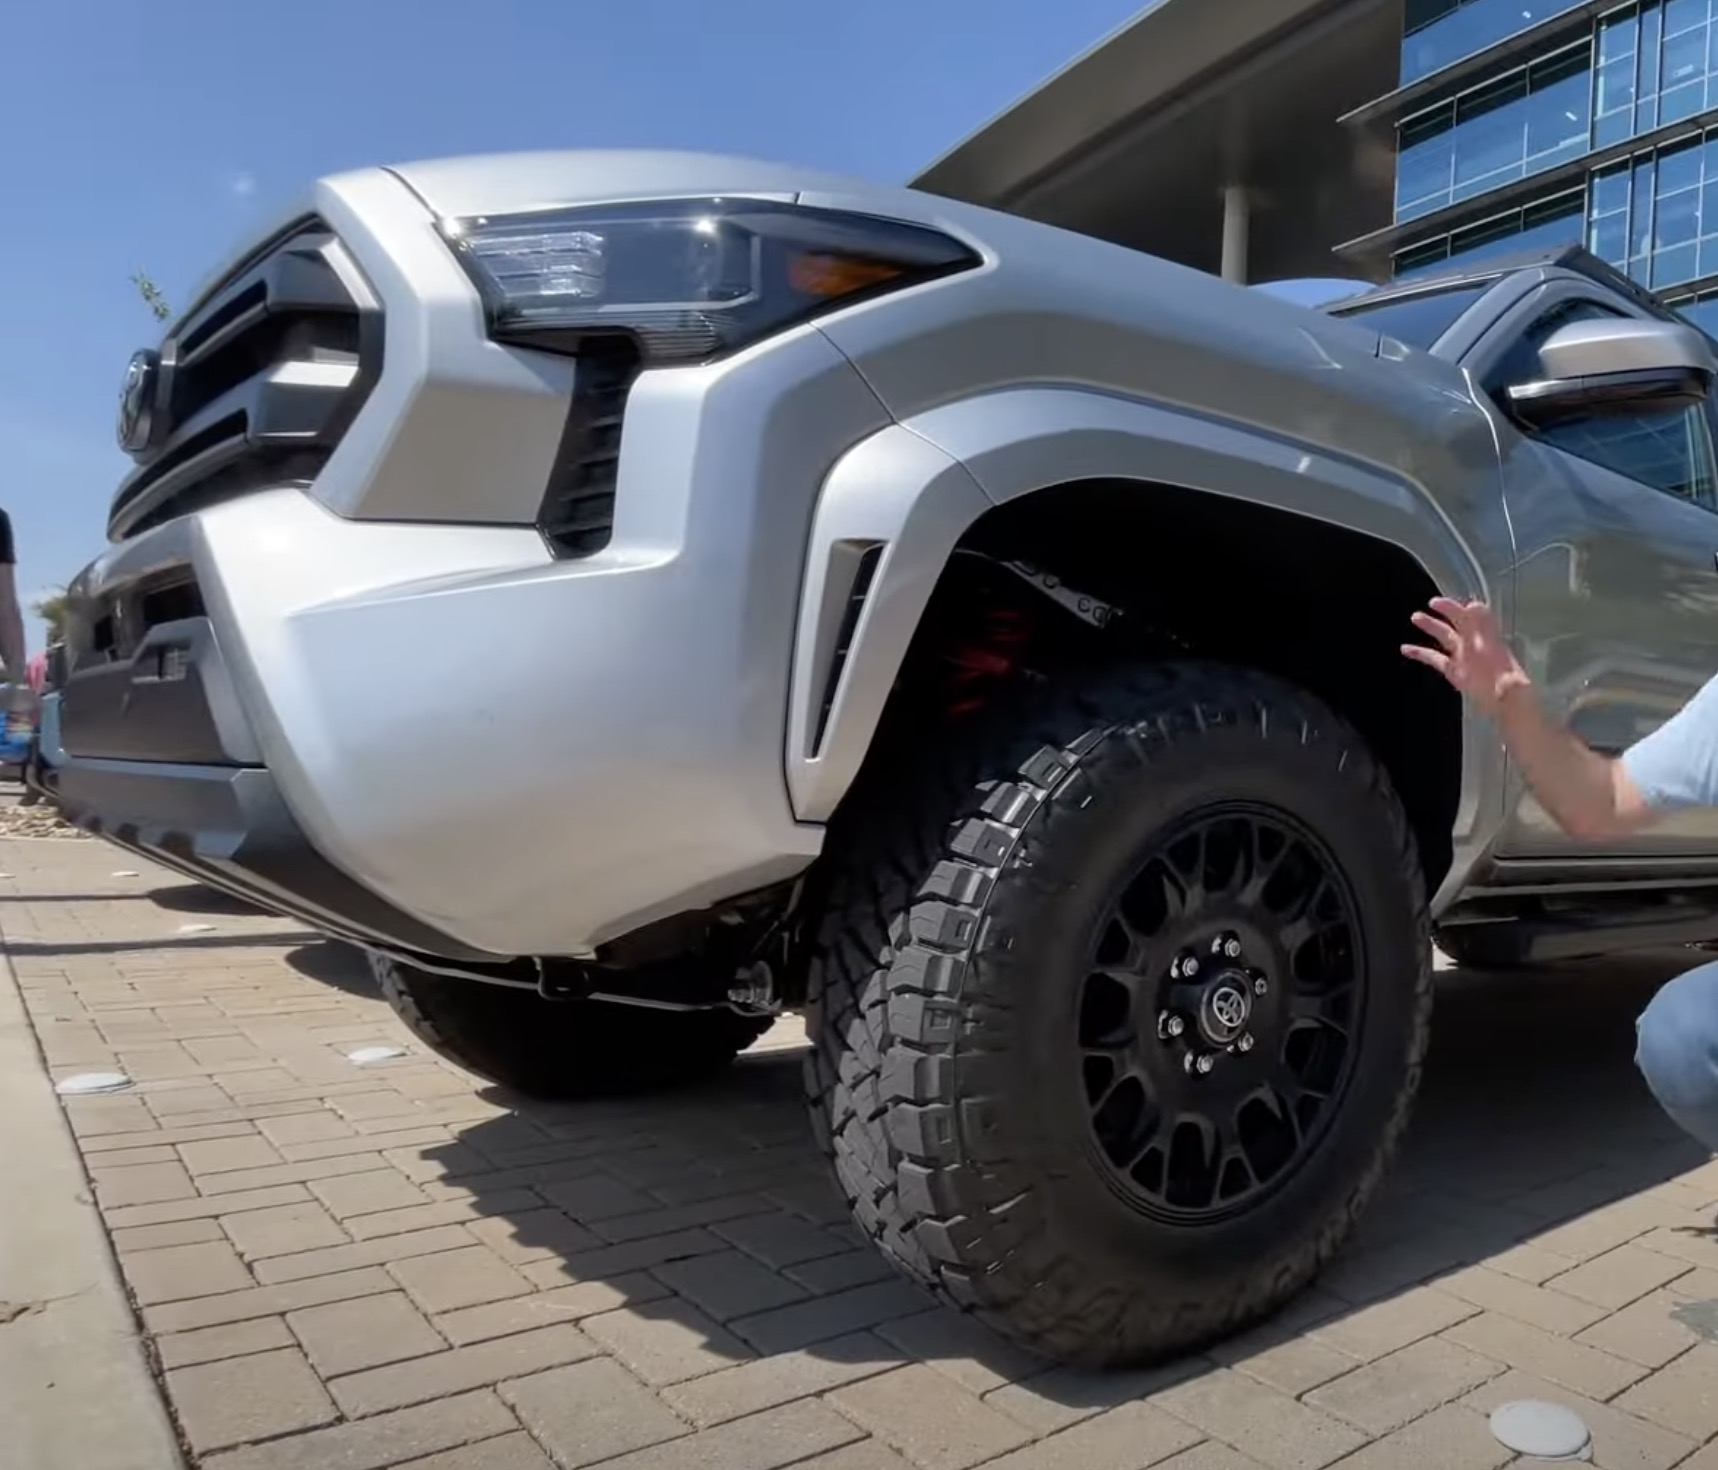 2024 Tacoma 2024 Tacoma SR5 - Specs, Price, MPG, Options/Packages, Features & Photos Celestial Silver 2024 Tacom SR5 TRD Lift Kit 2.5 2.0 inches springs struts build 3